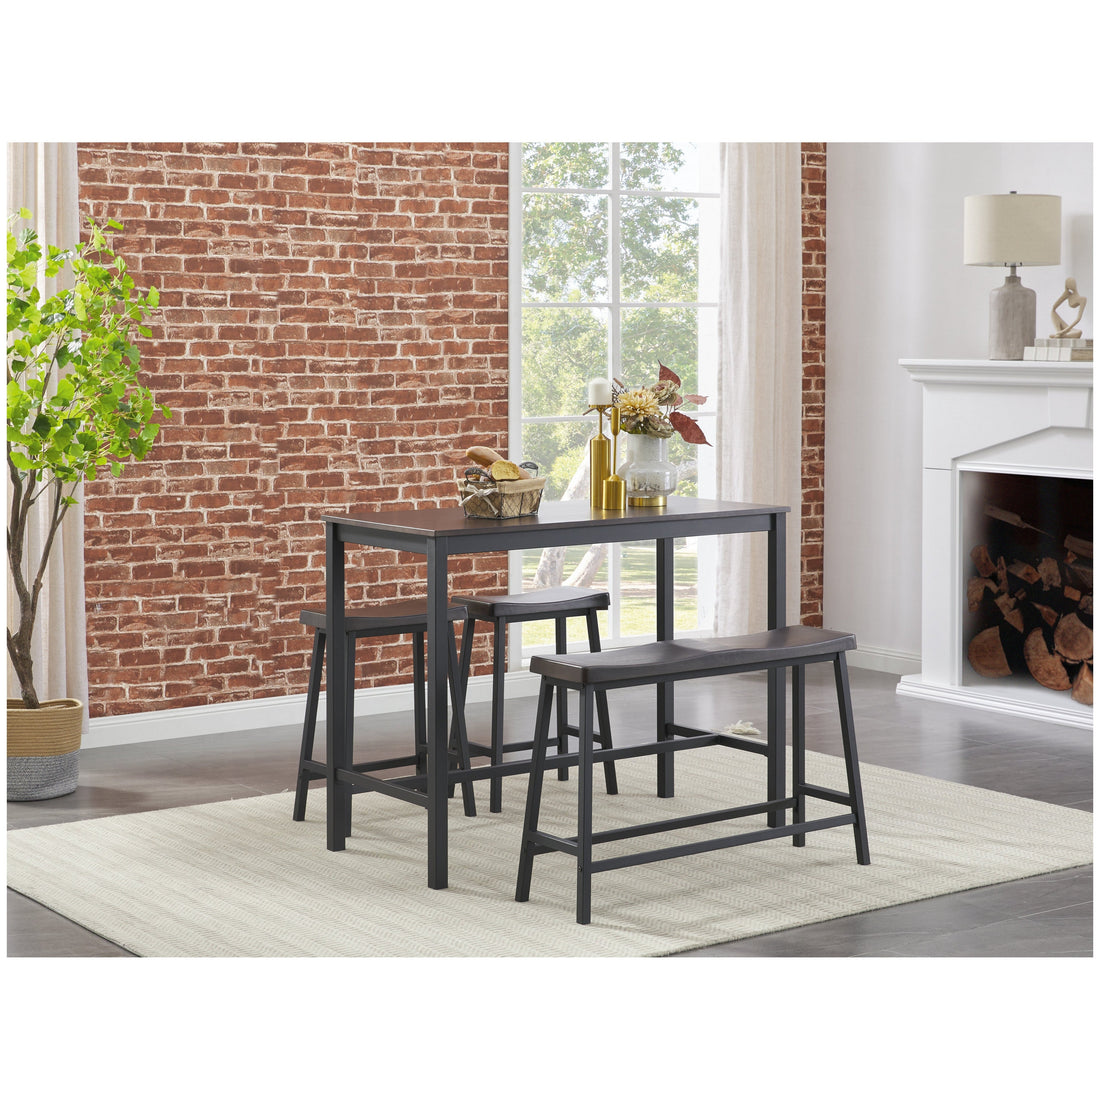 Playden Counter Height Dining Table and Bar Stools (Set of 4) Ash-D231-233